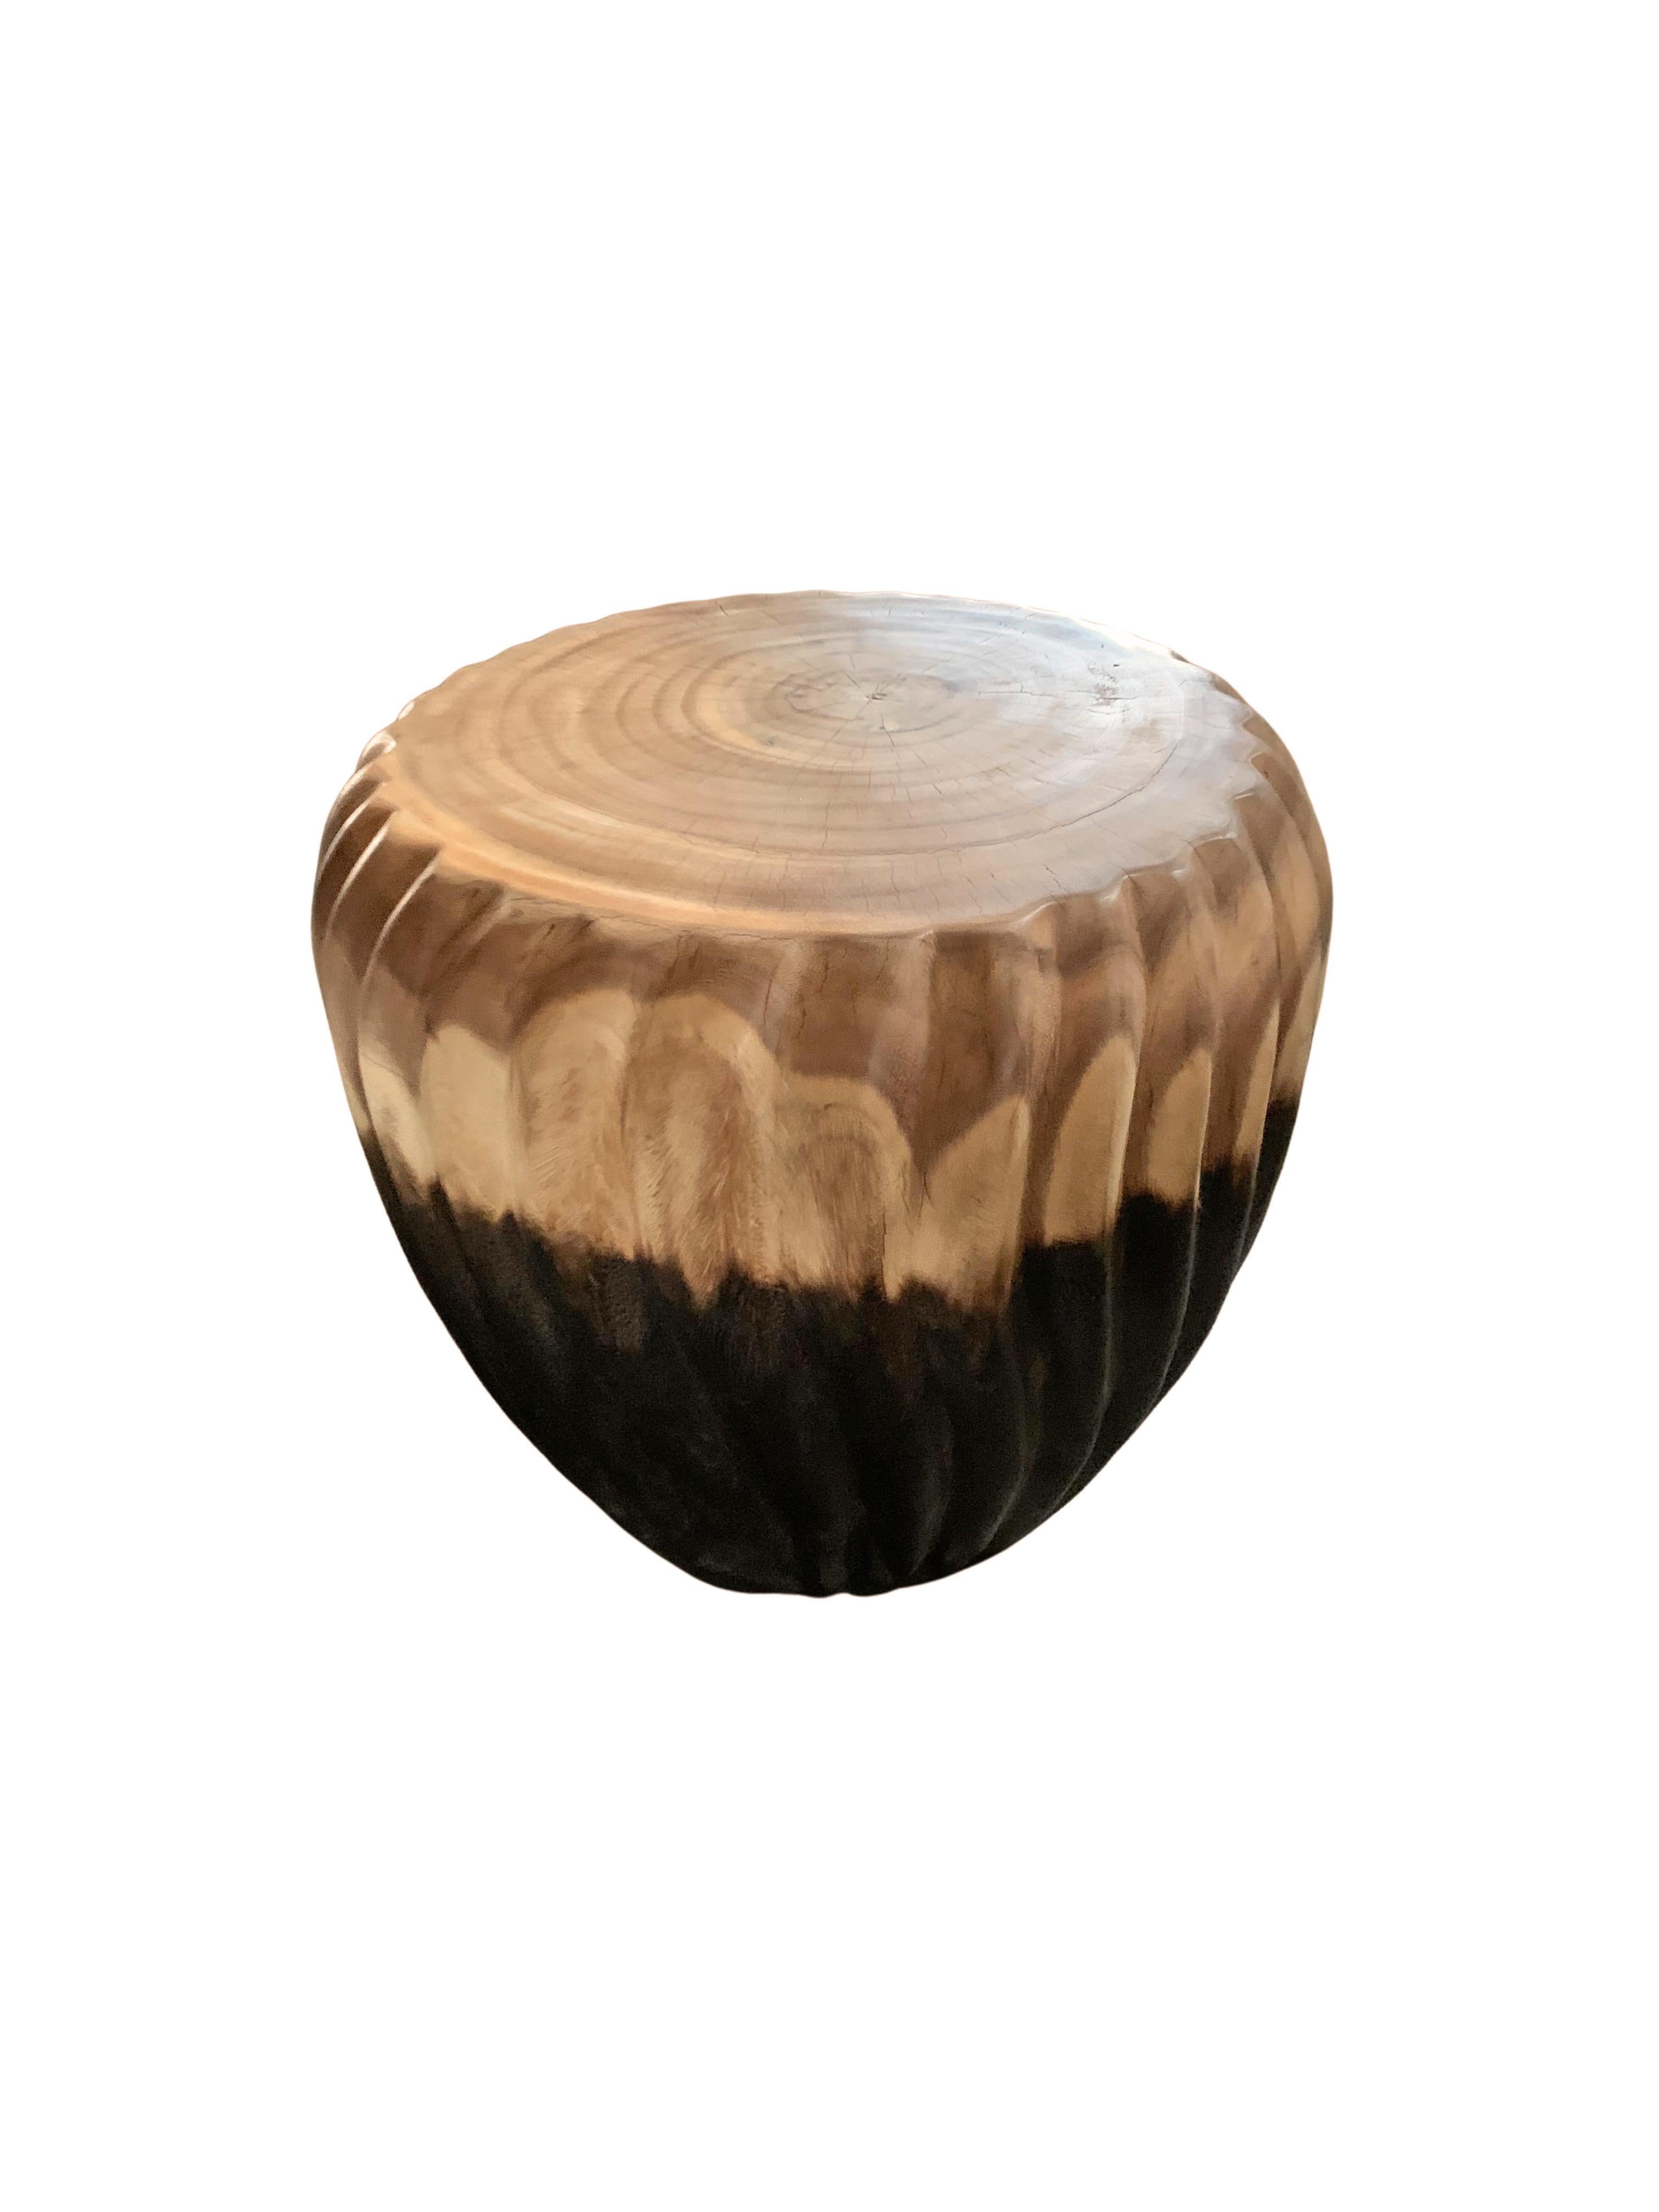 Indonesian Sculptural Side Table Solid Mango Wood, Carved Ribbed Detailing Modern Organic For Sale